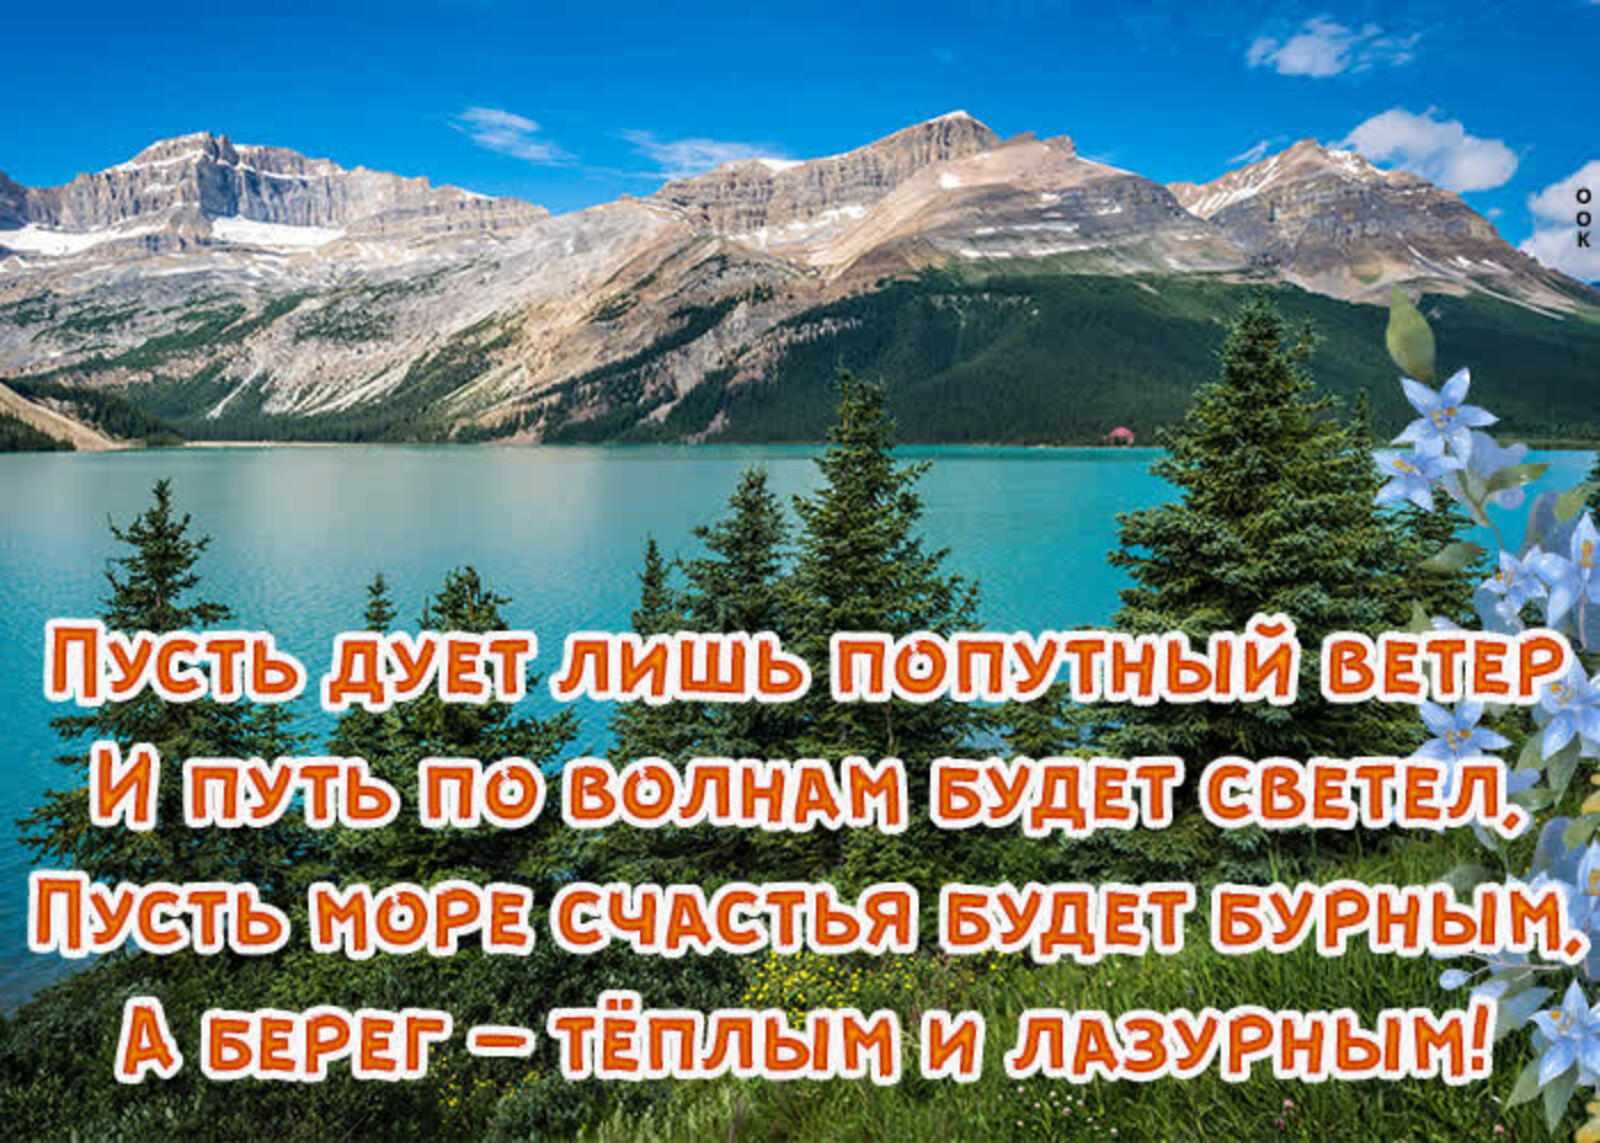 a picture for you happiness and great mood mountains inscription